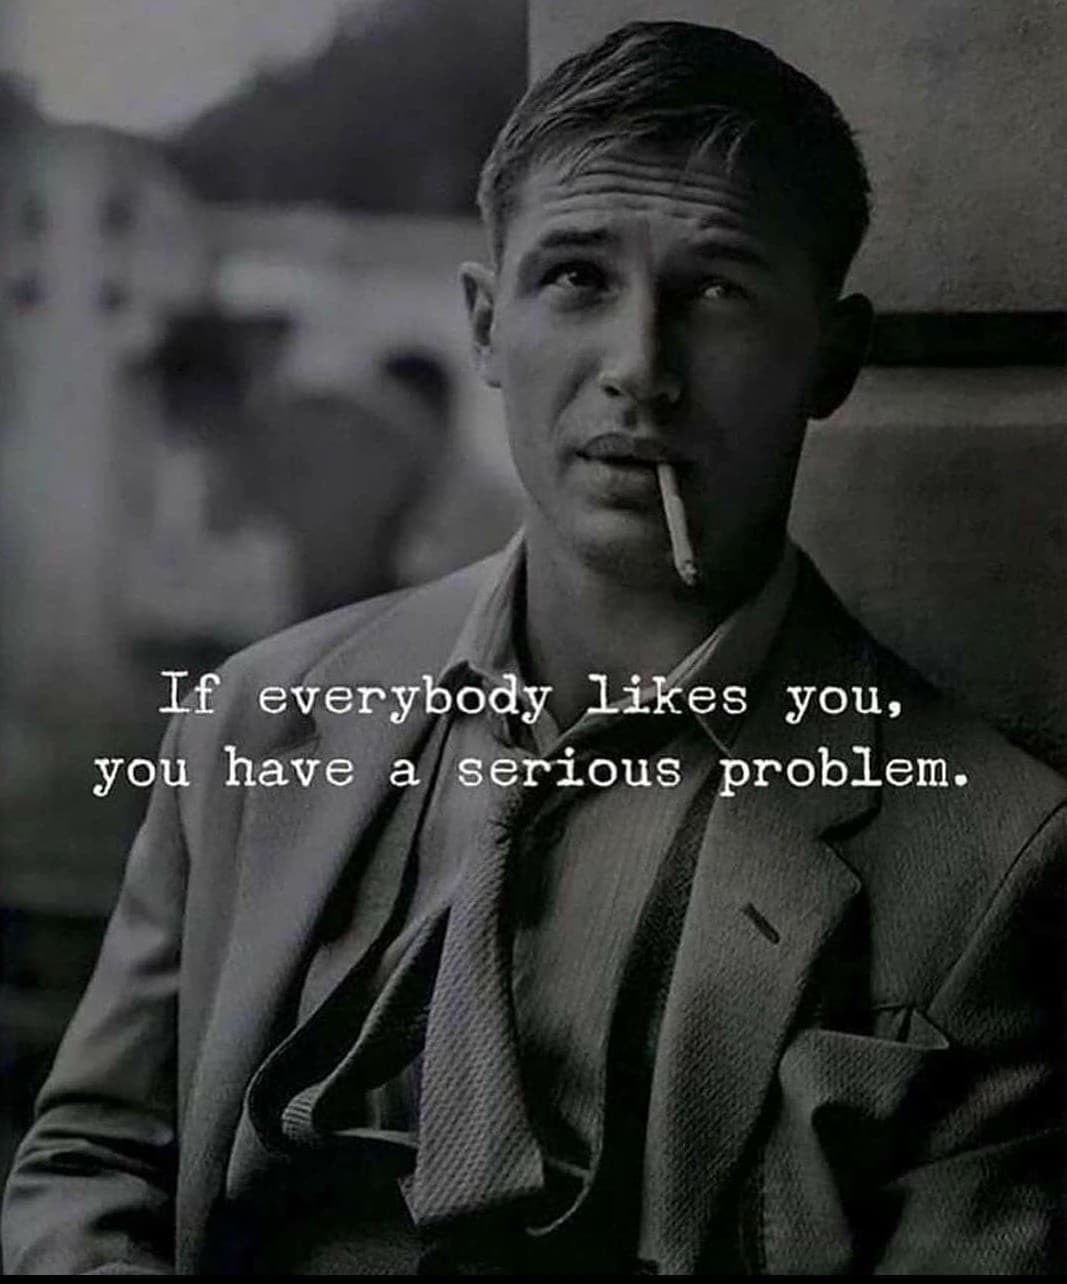 if everybody likes you have a serious problem